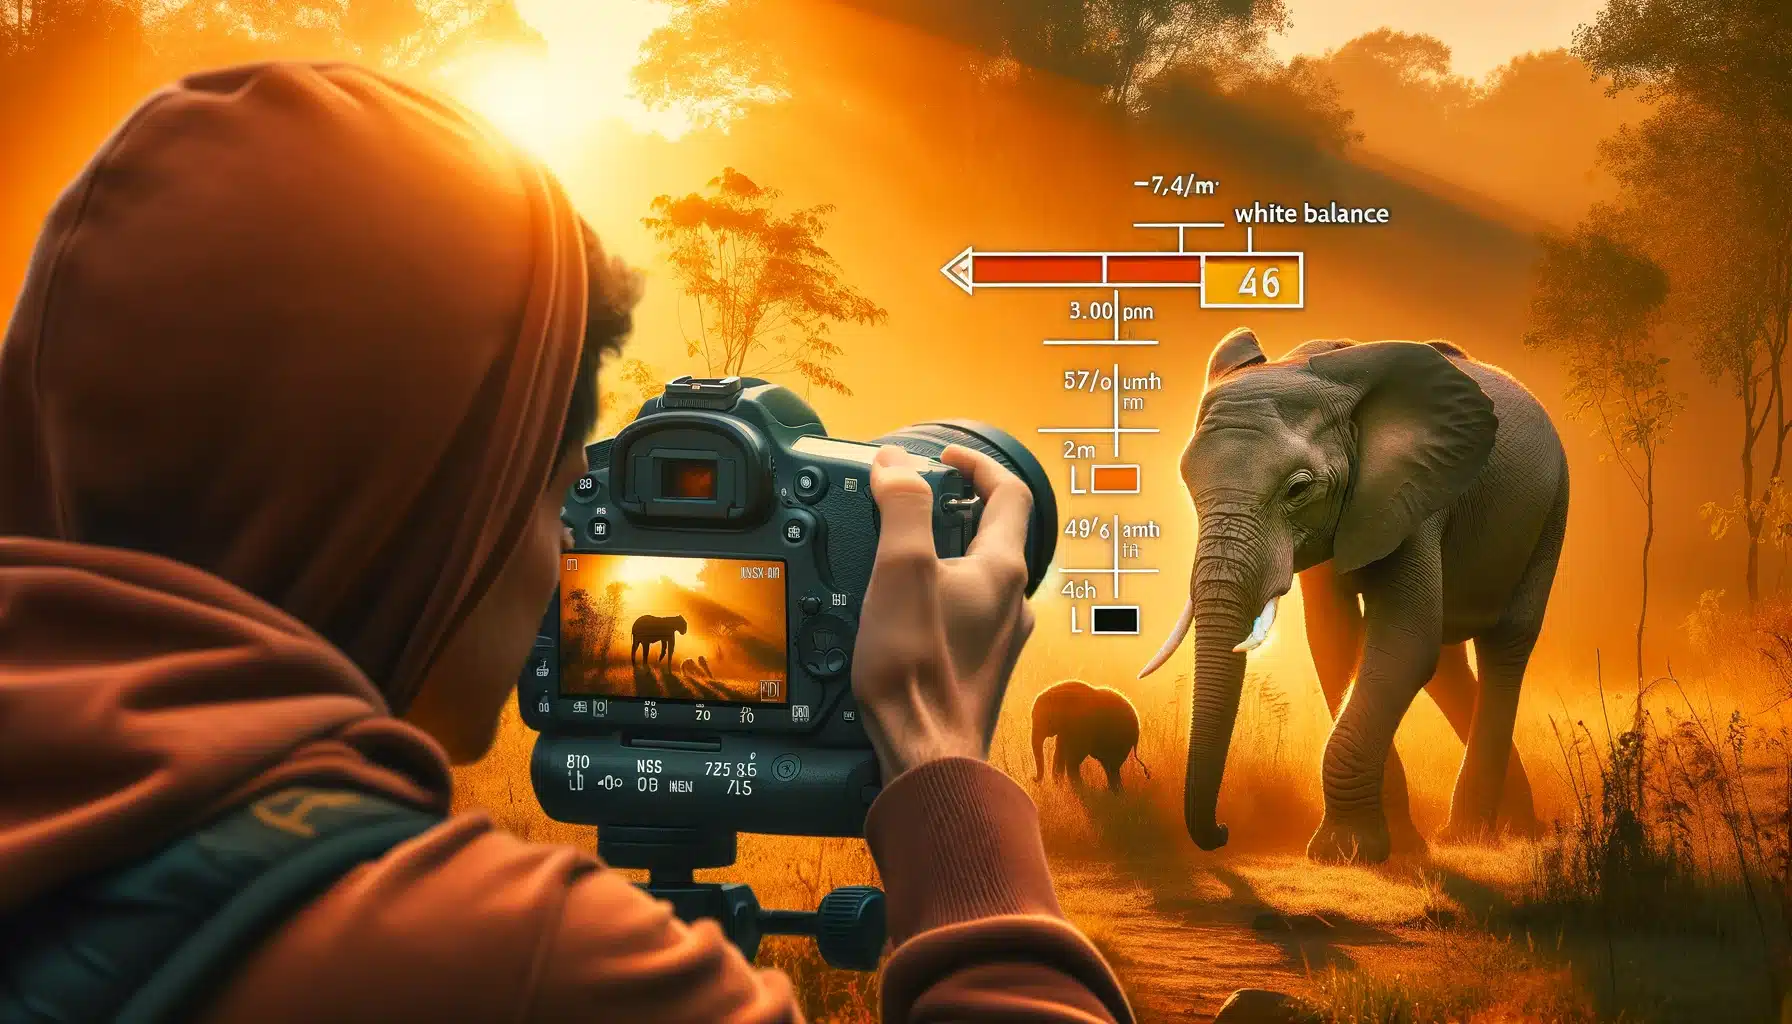 Wildlife photographer adjusts white balance to capture animal's true colors during golden hour, enhancing natural authenticity.